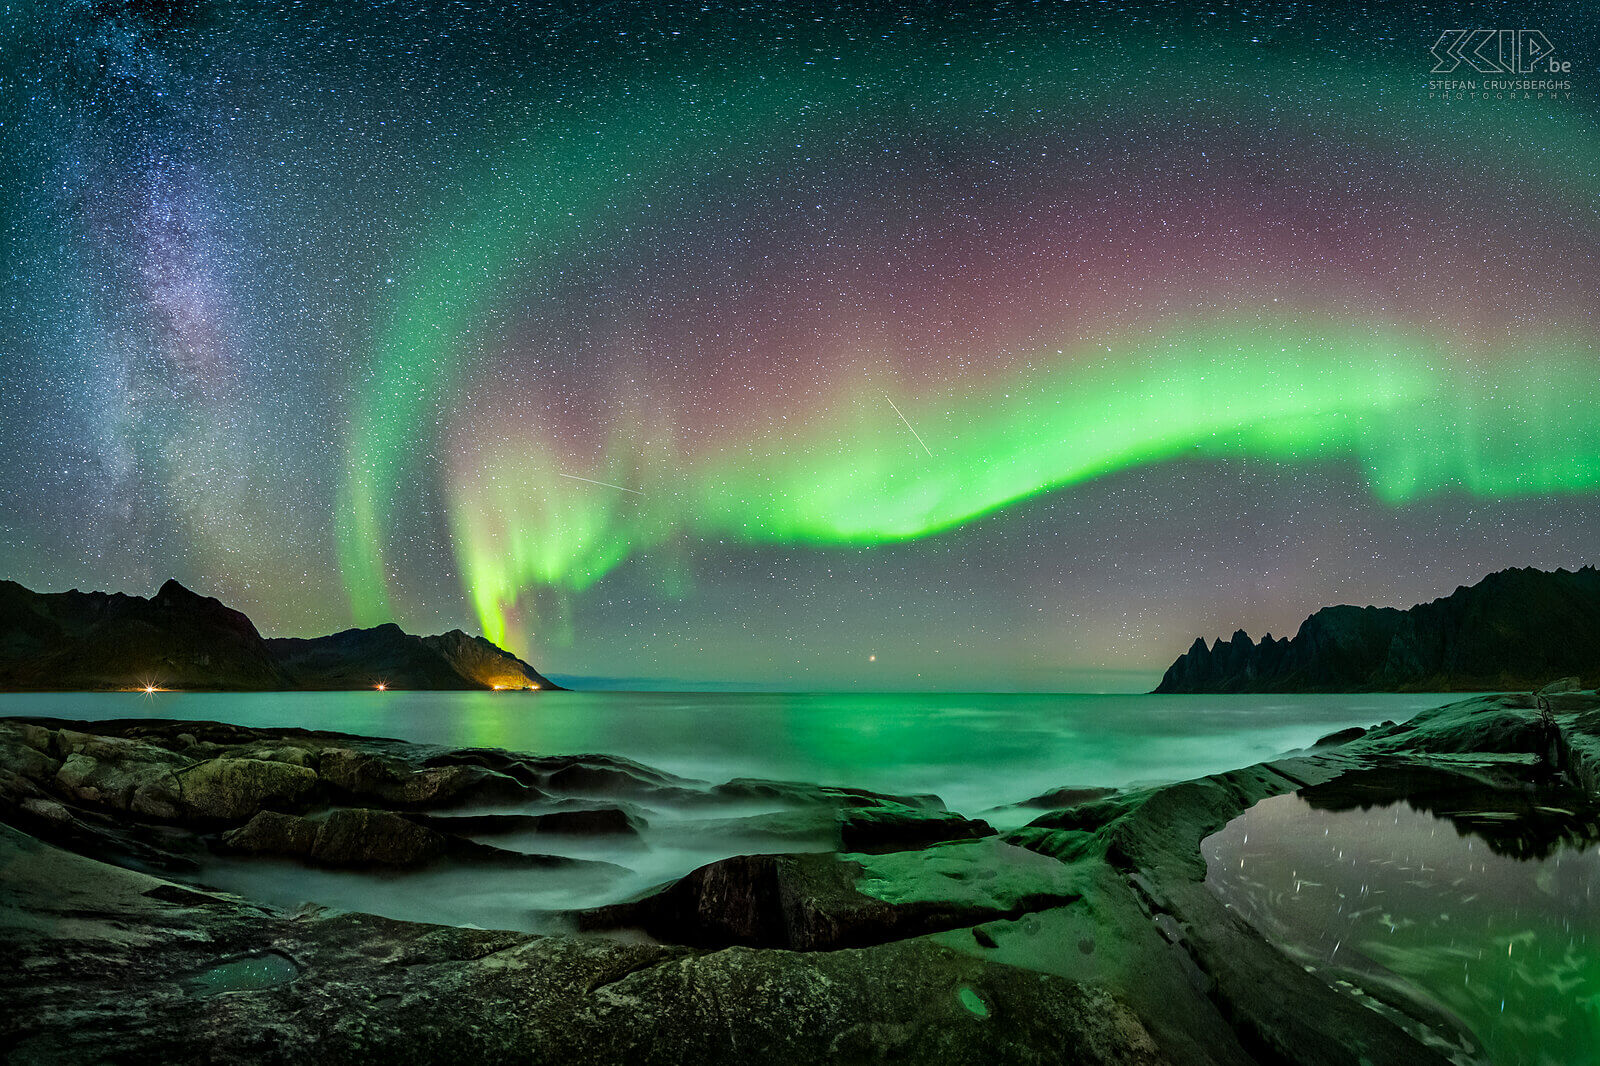 Senja - Tungeneset - Northern lights A panorama image of a magical night at the rocky beach of Tungeneset on Senja island in Norway. The northern lights (aurora borealis) were very active with wonderful green and red colors, the milky way was also visible and my camera captured some shooting stars. The bright star at the horizon in the middle of the image is Arcturus. Stefan Cruysberghs